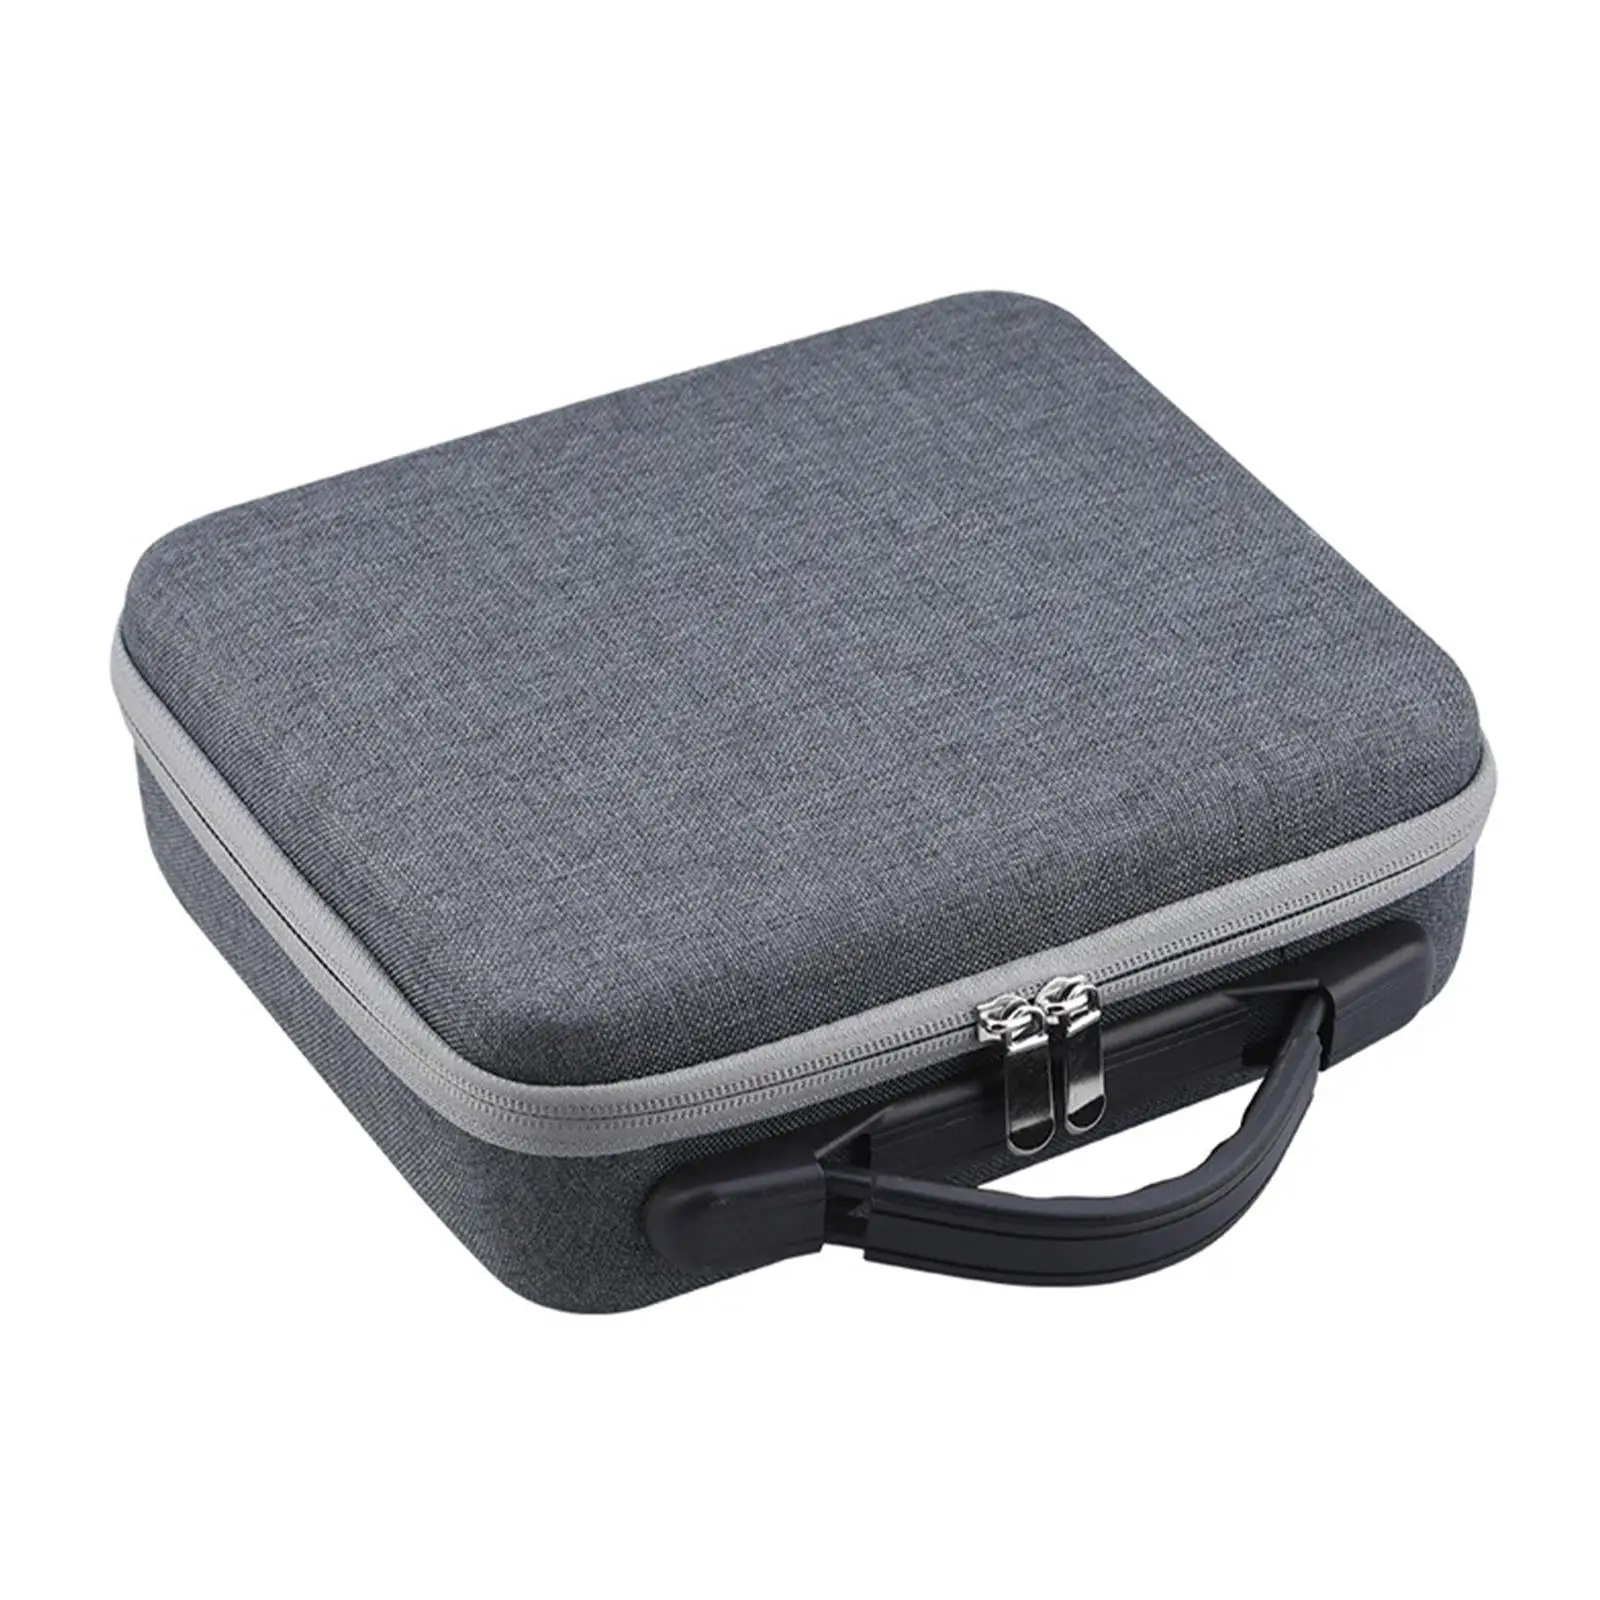 Portable Carrying Case Dustproof with Handle Large Capacity Protective Action Camera Accessories Handbag